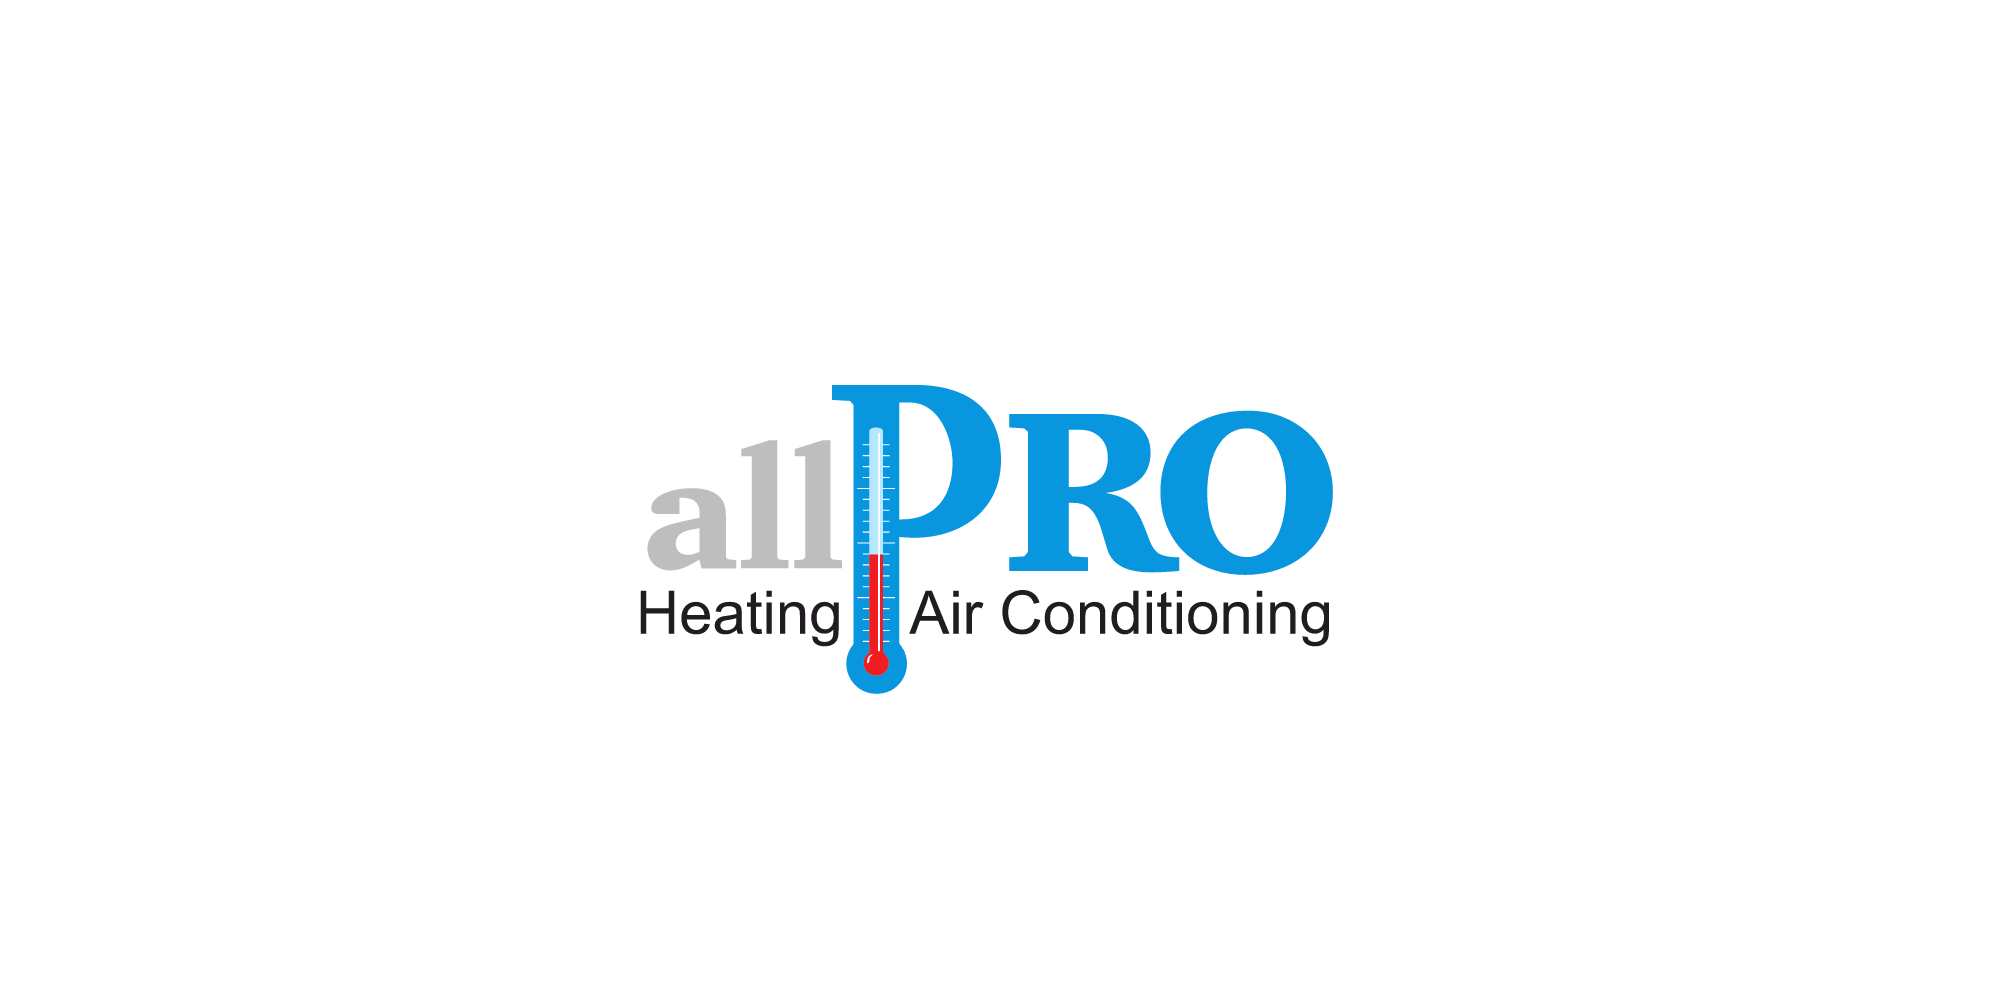 All Pro Heating And Air Conditioning, Inc. Logo